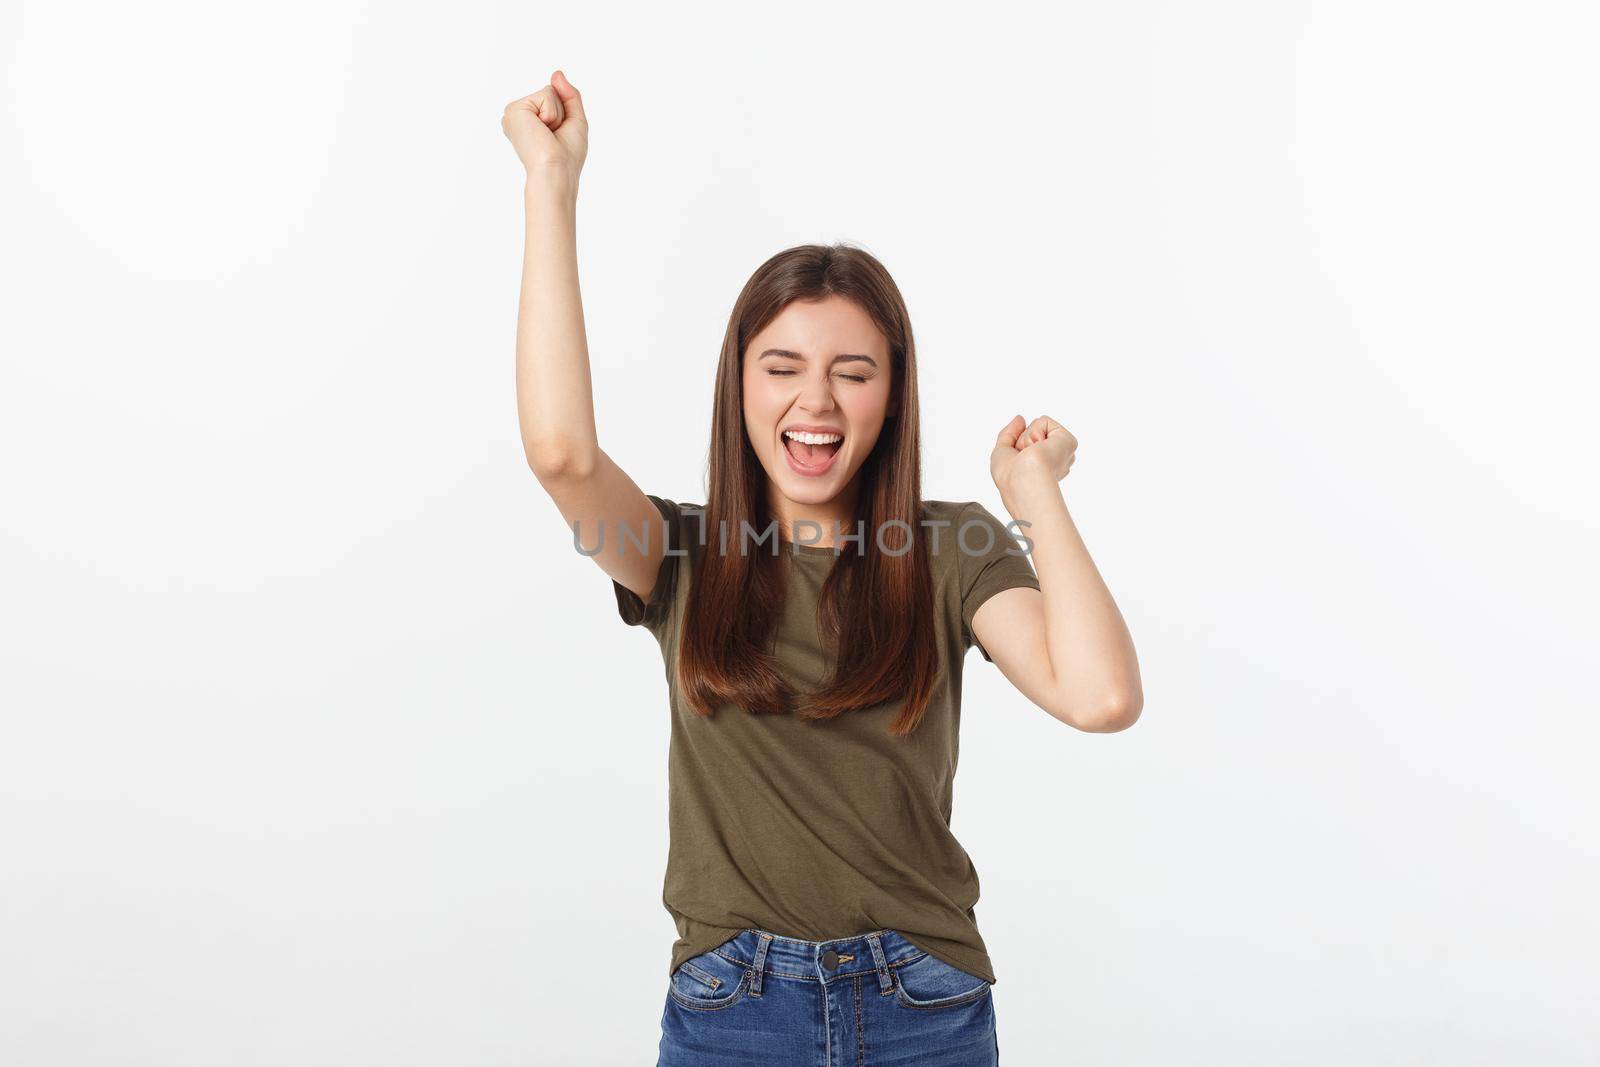 Winning success woman happy ecstatic celebrating being a winner. Dynamic energetic image of Caucasian female model isolated on white background.